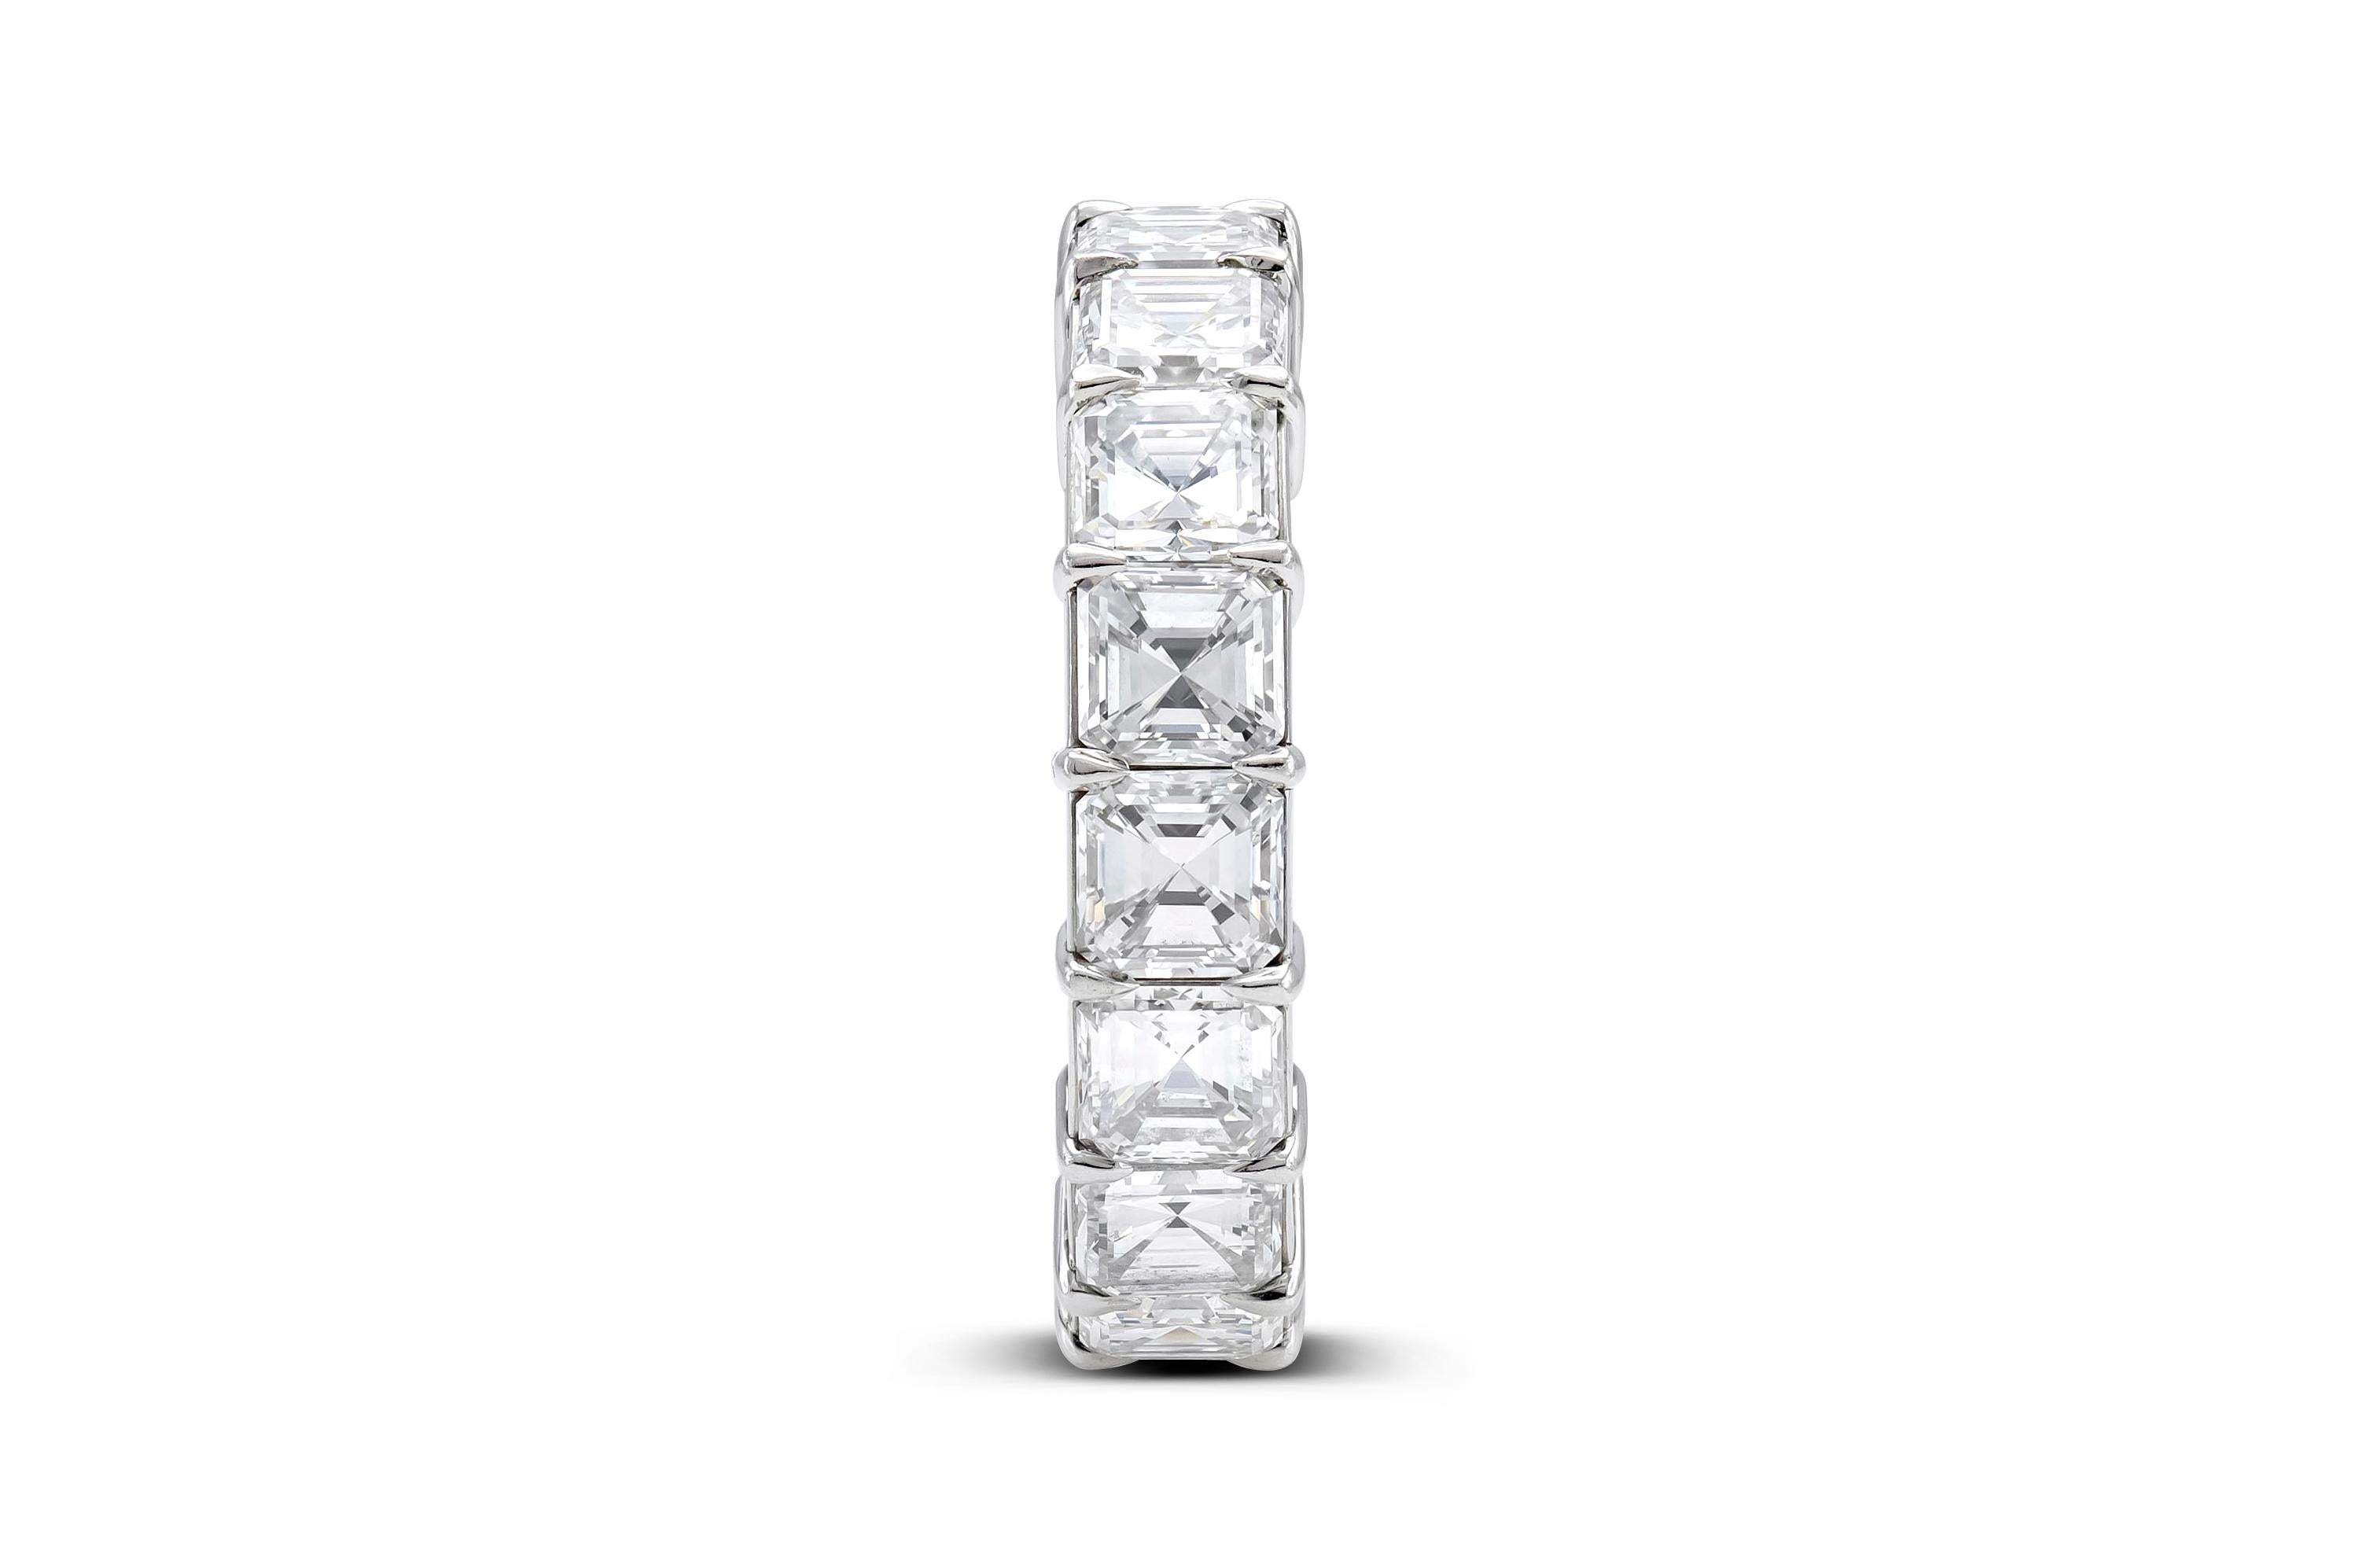 Finely crafted in platinum with 17 Square Emerald cut diamonds weighing approximately a total of 11.00 carats.
E-F color, VVS-VS clarity
Signed by Graff
Size 9